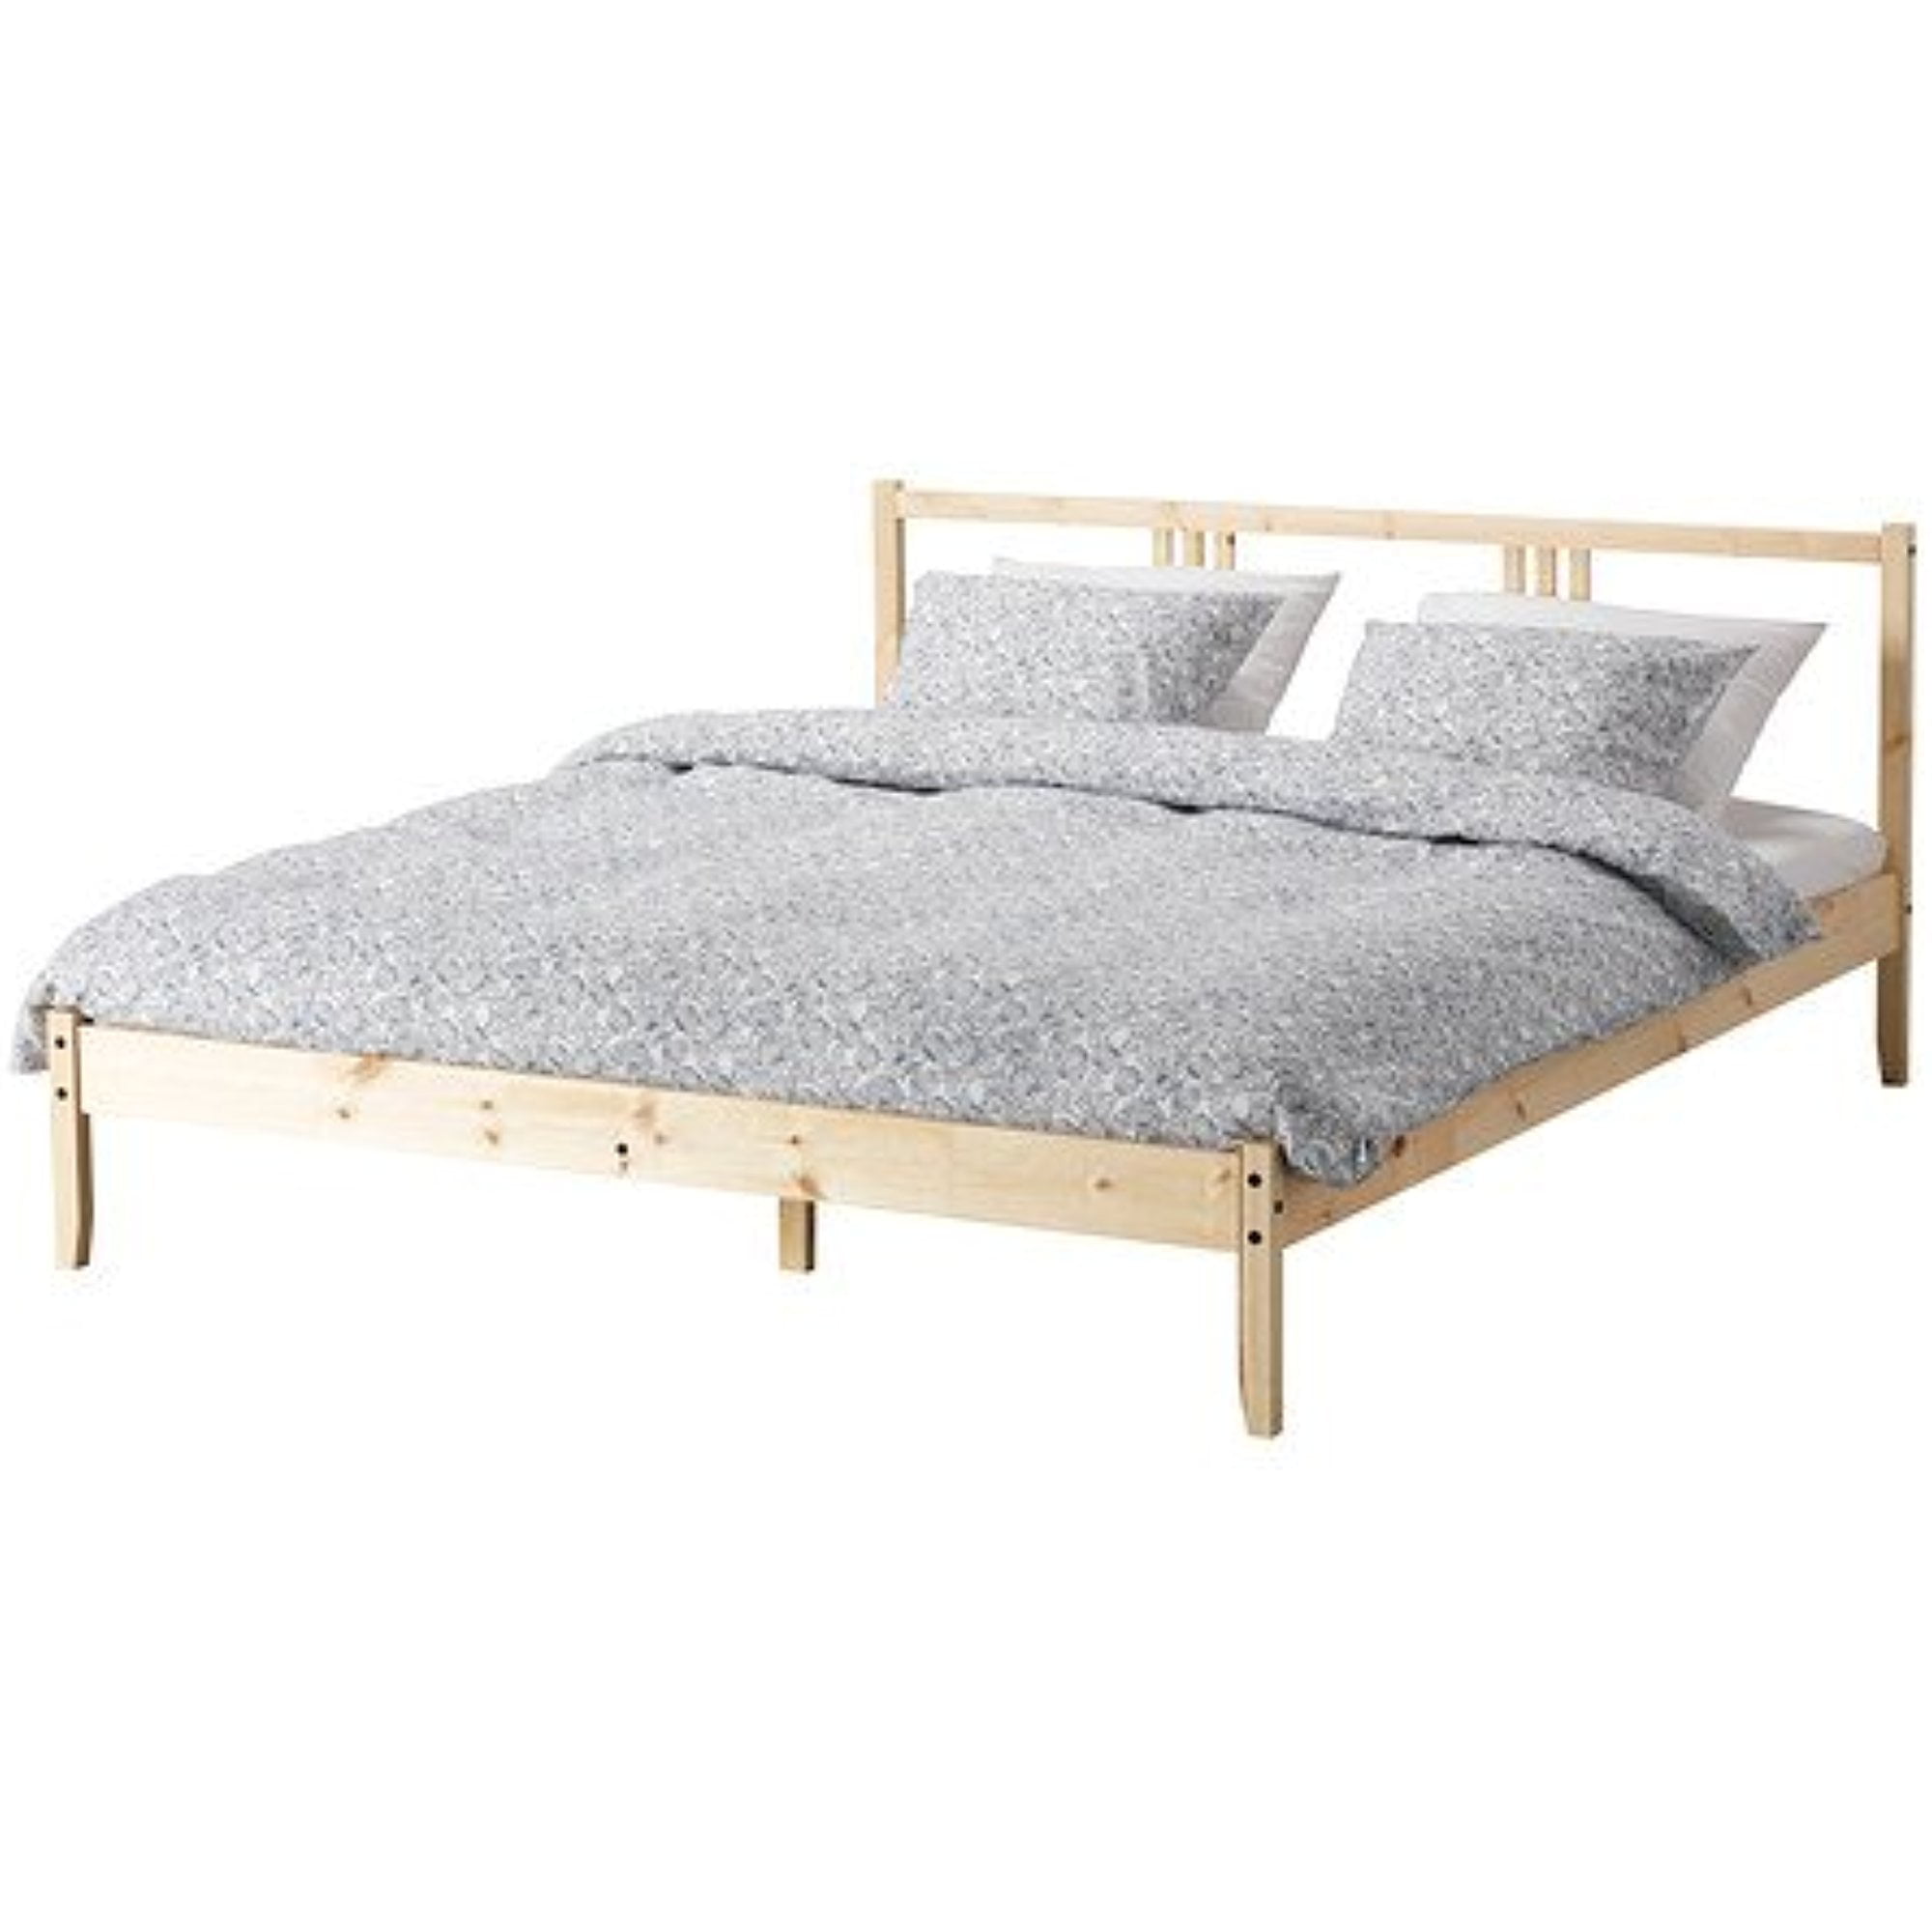 Ikea Full Size Bed Frame Solid Wood, King Size Bed Frame With Headboard Ikea